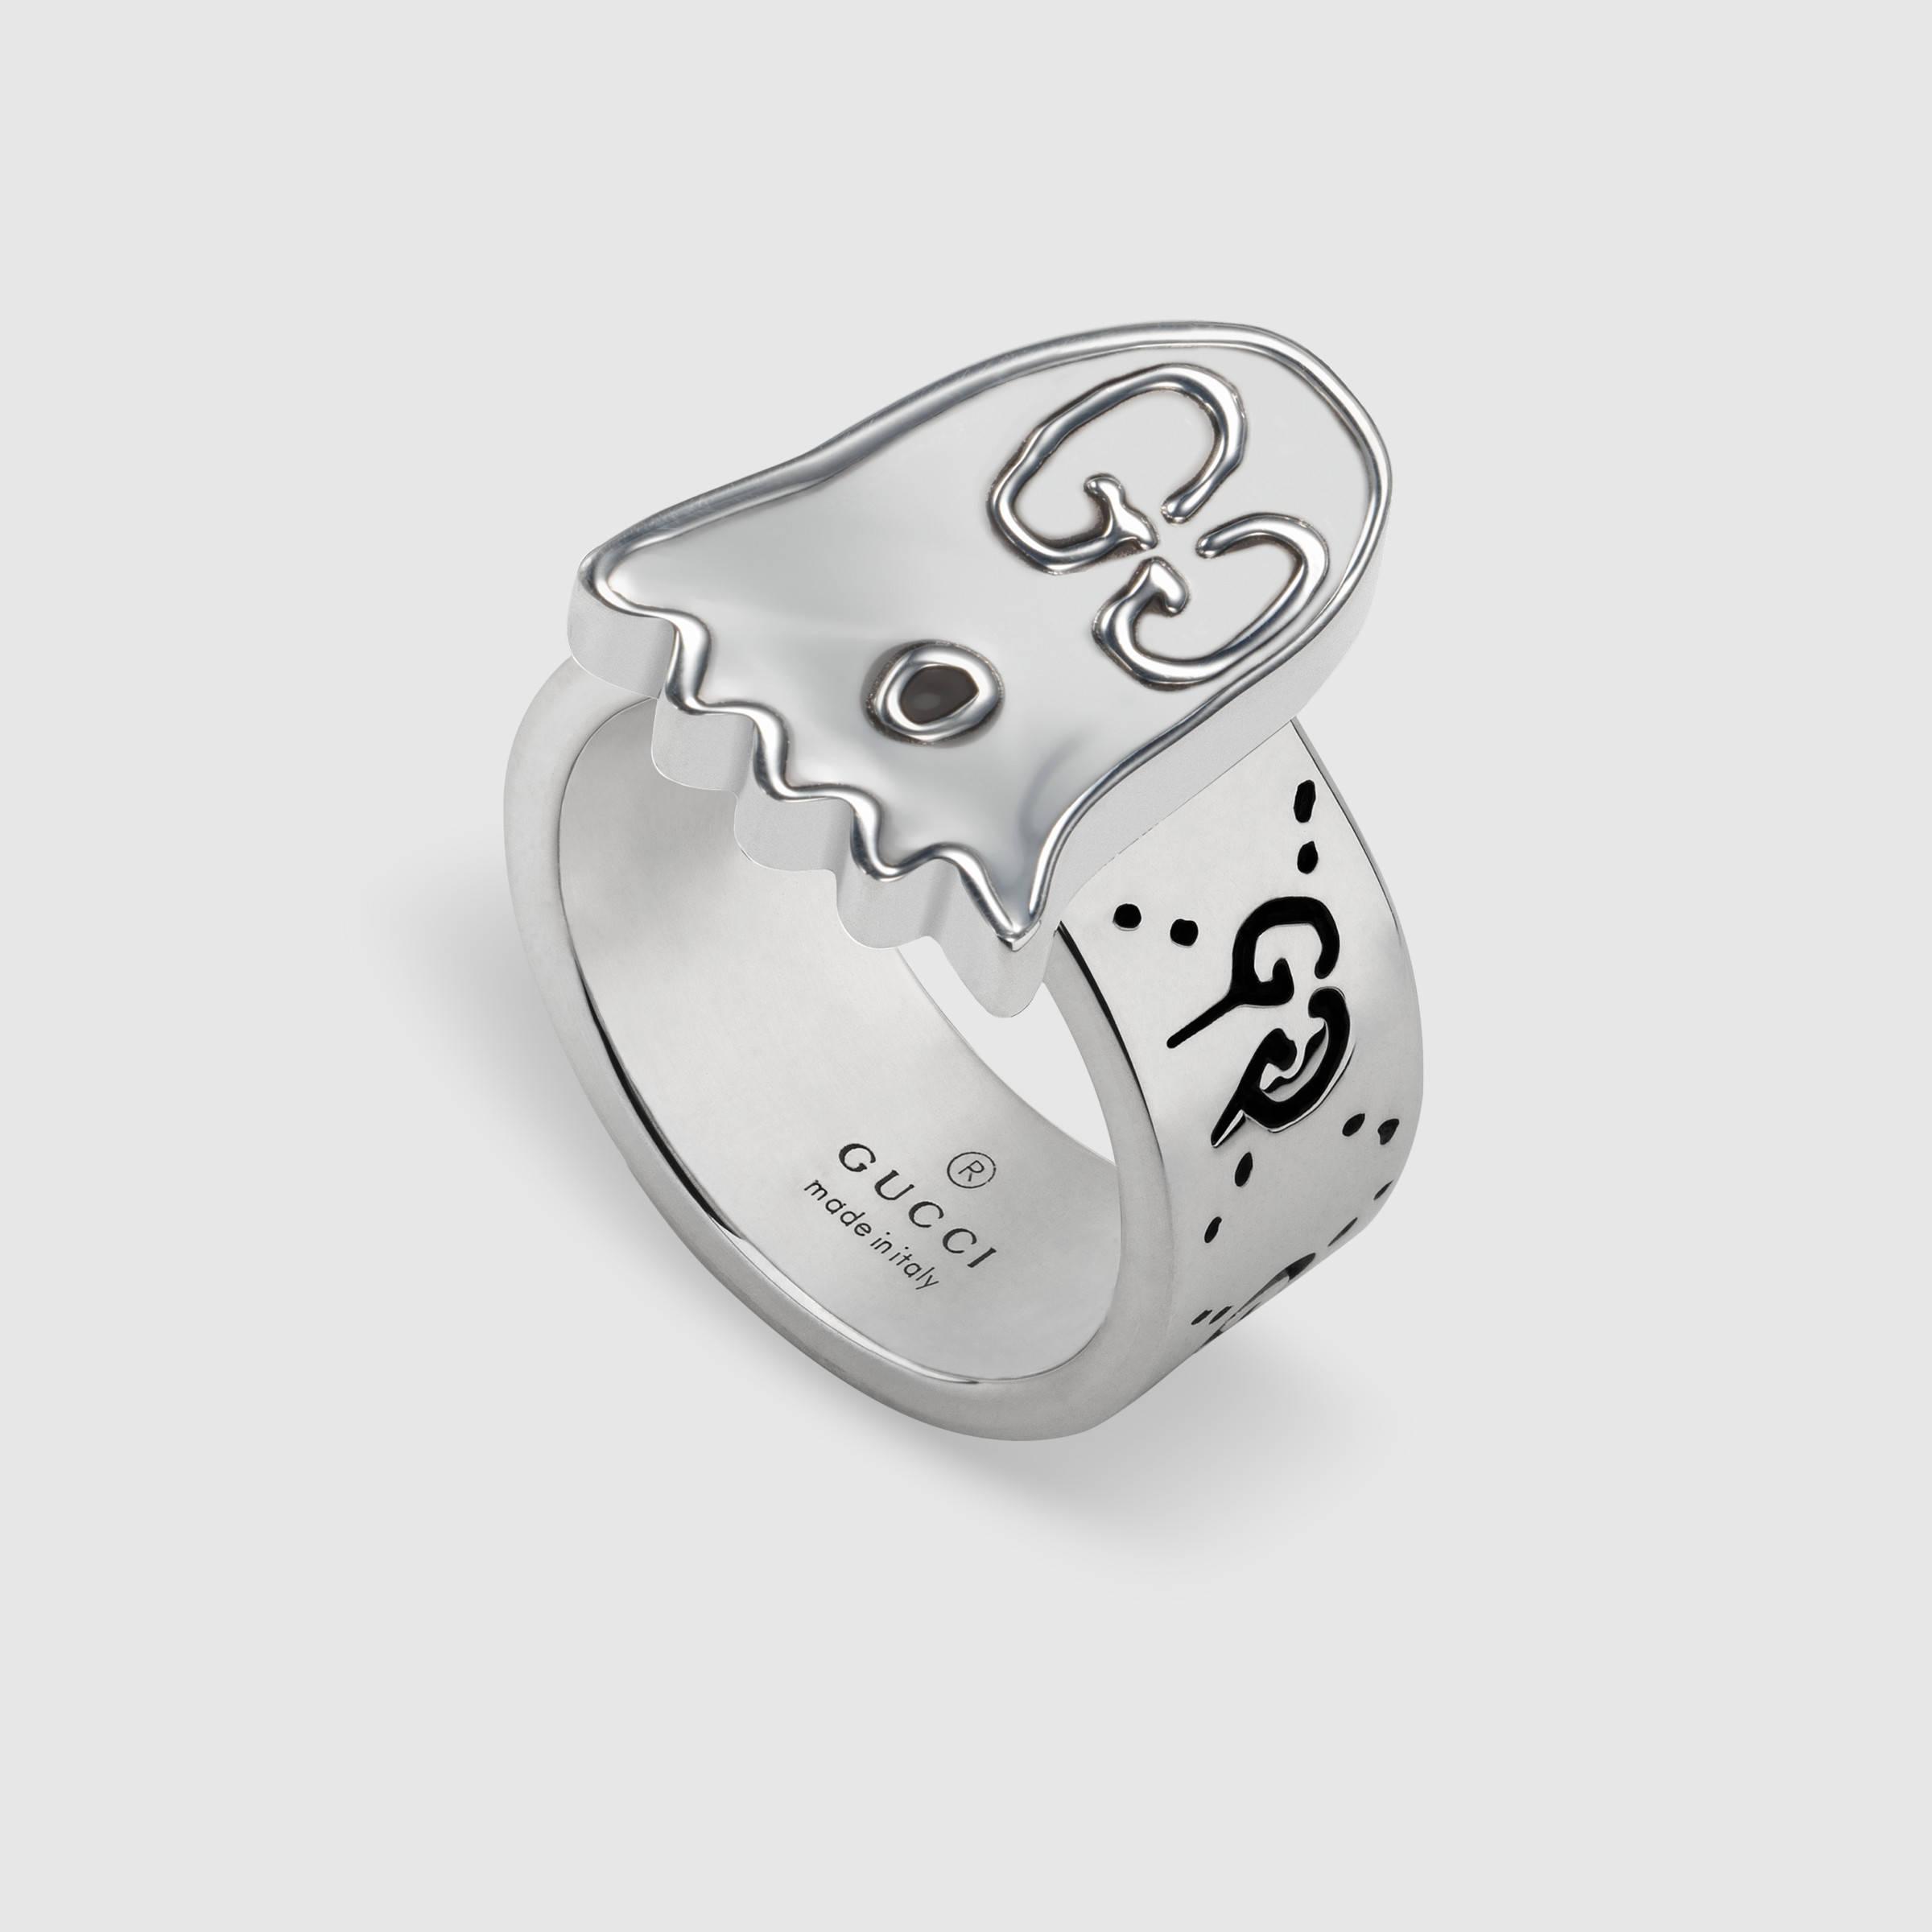 Lyst Gucci Ghost Ring In Silver in Metallic